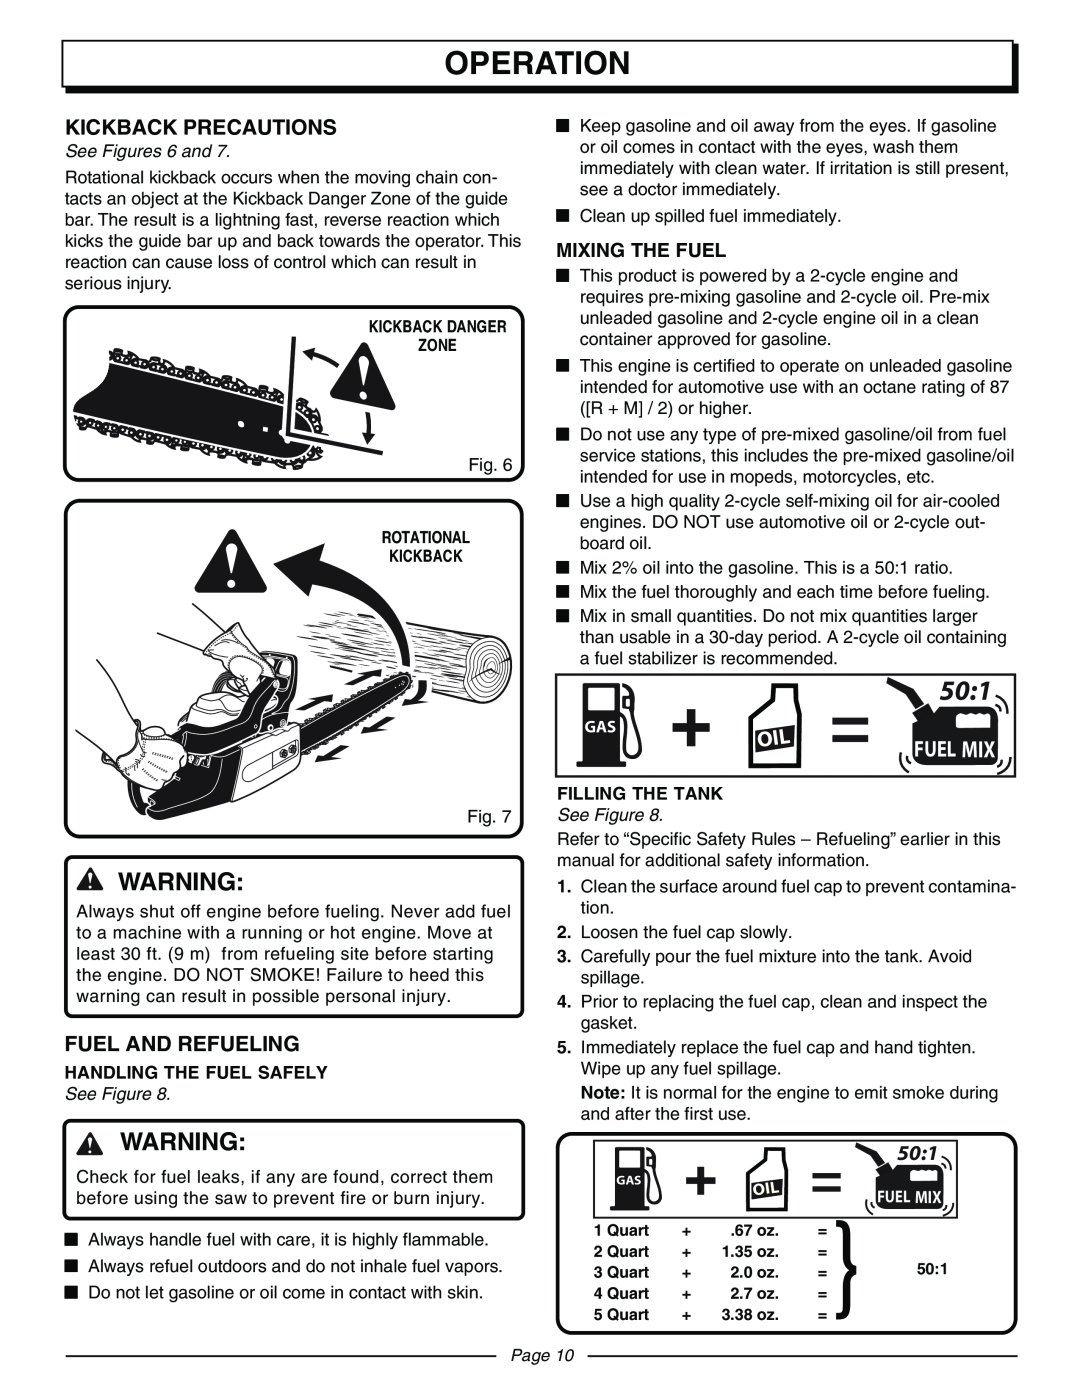 Homelite UT10570 manual Kickback Precautions, Fuel And Refueling, Operation, Mixing The Fuel, See Figures 6 and, Page 